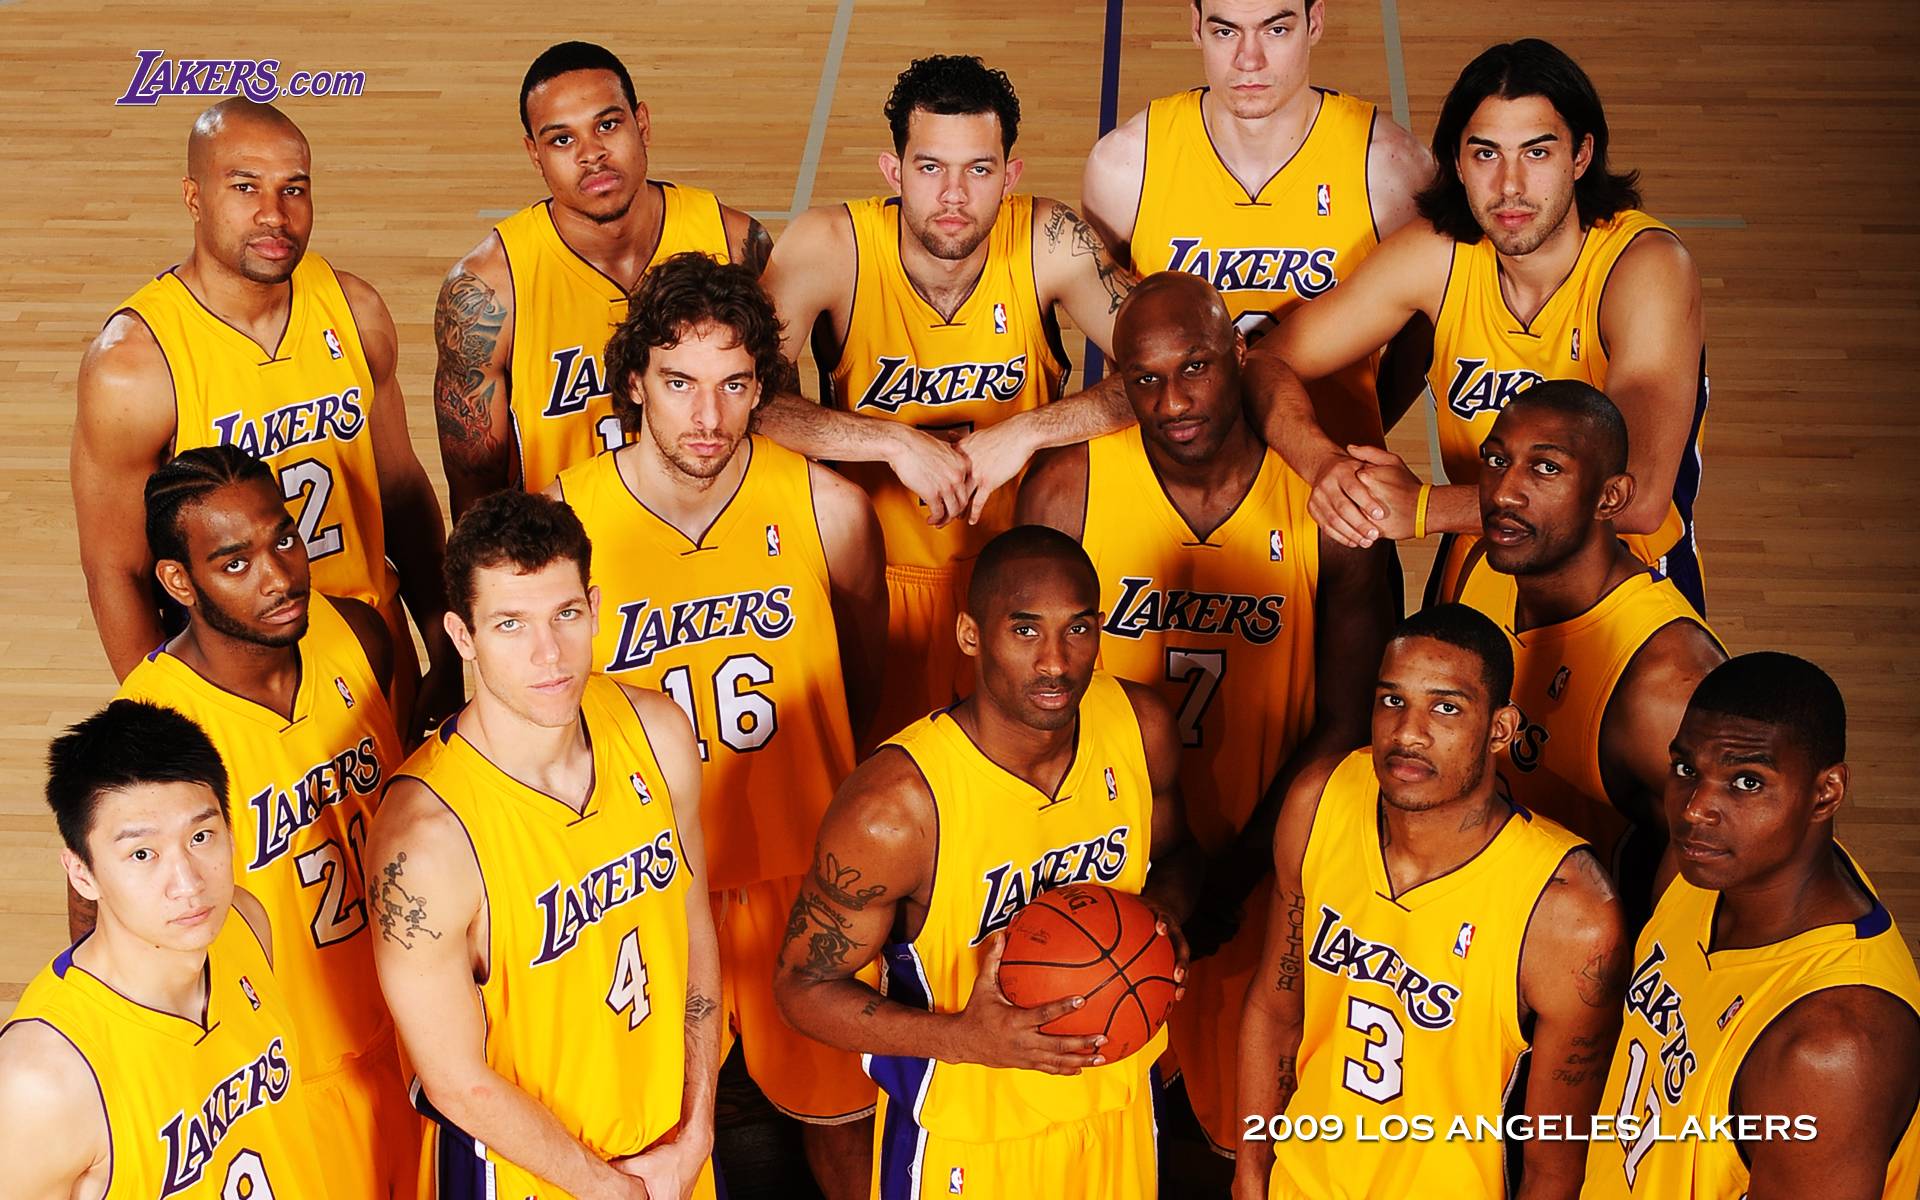 Lakers Team 2021 Wallpaper One watch brand dominates the wrists of